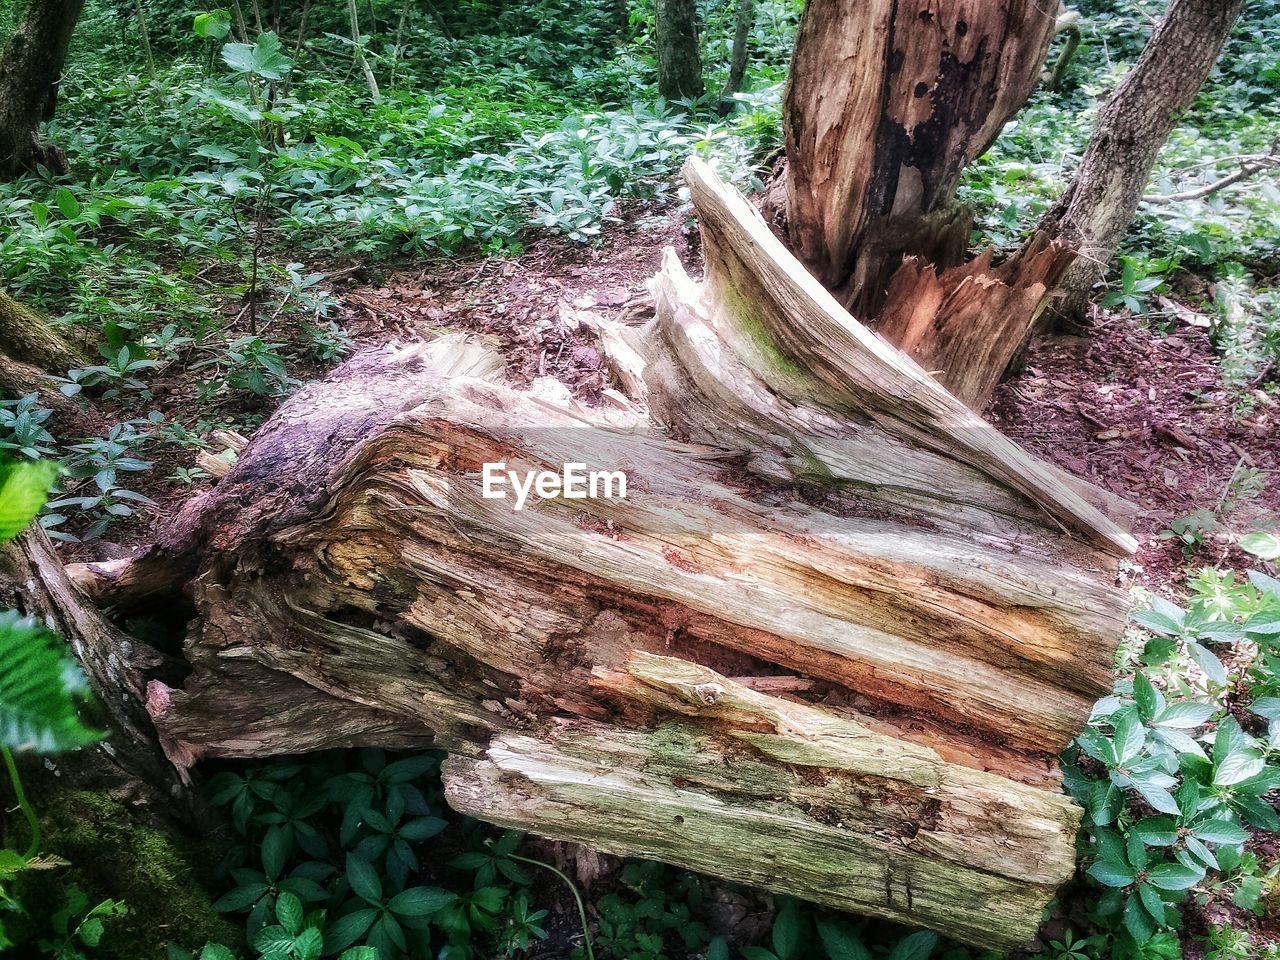 TREE TRUNK IN FOREST